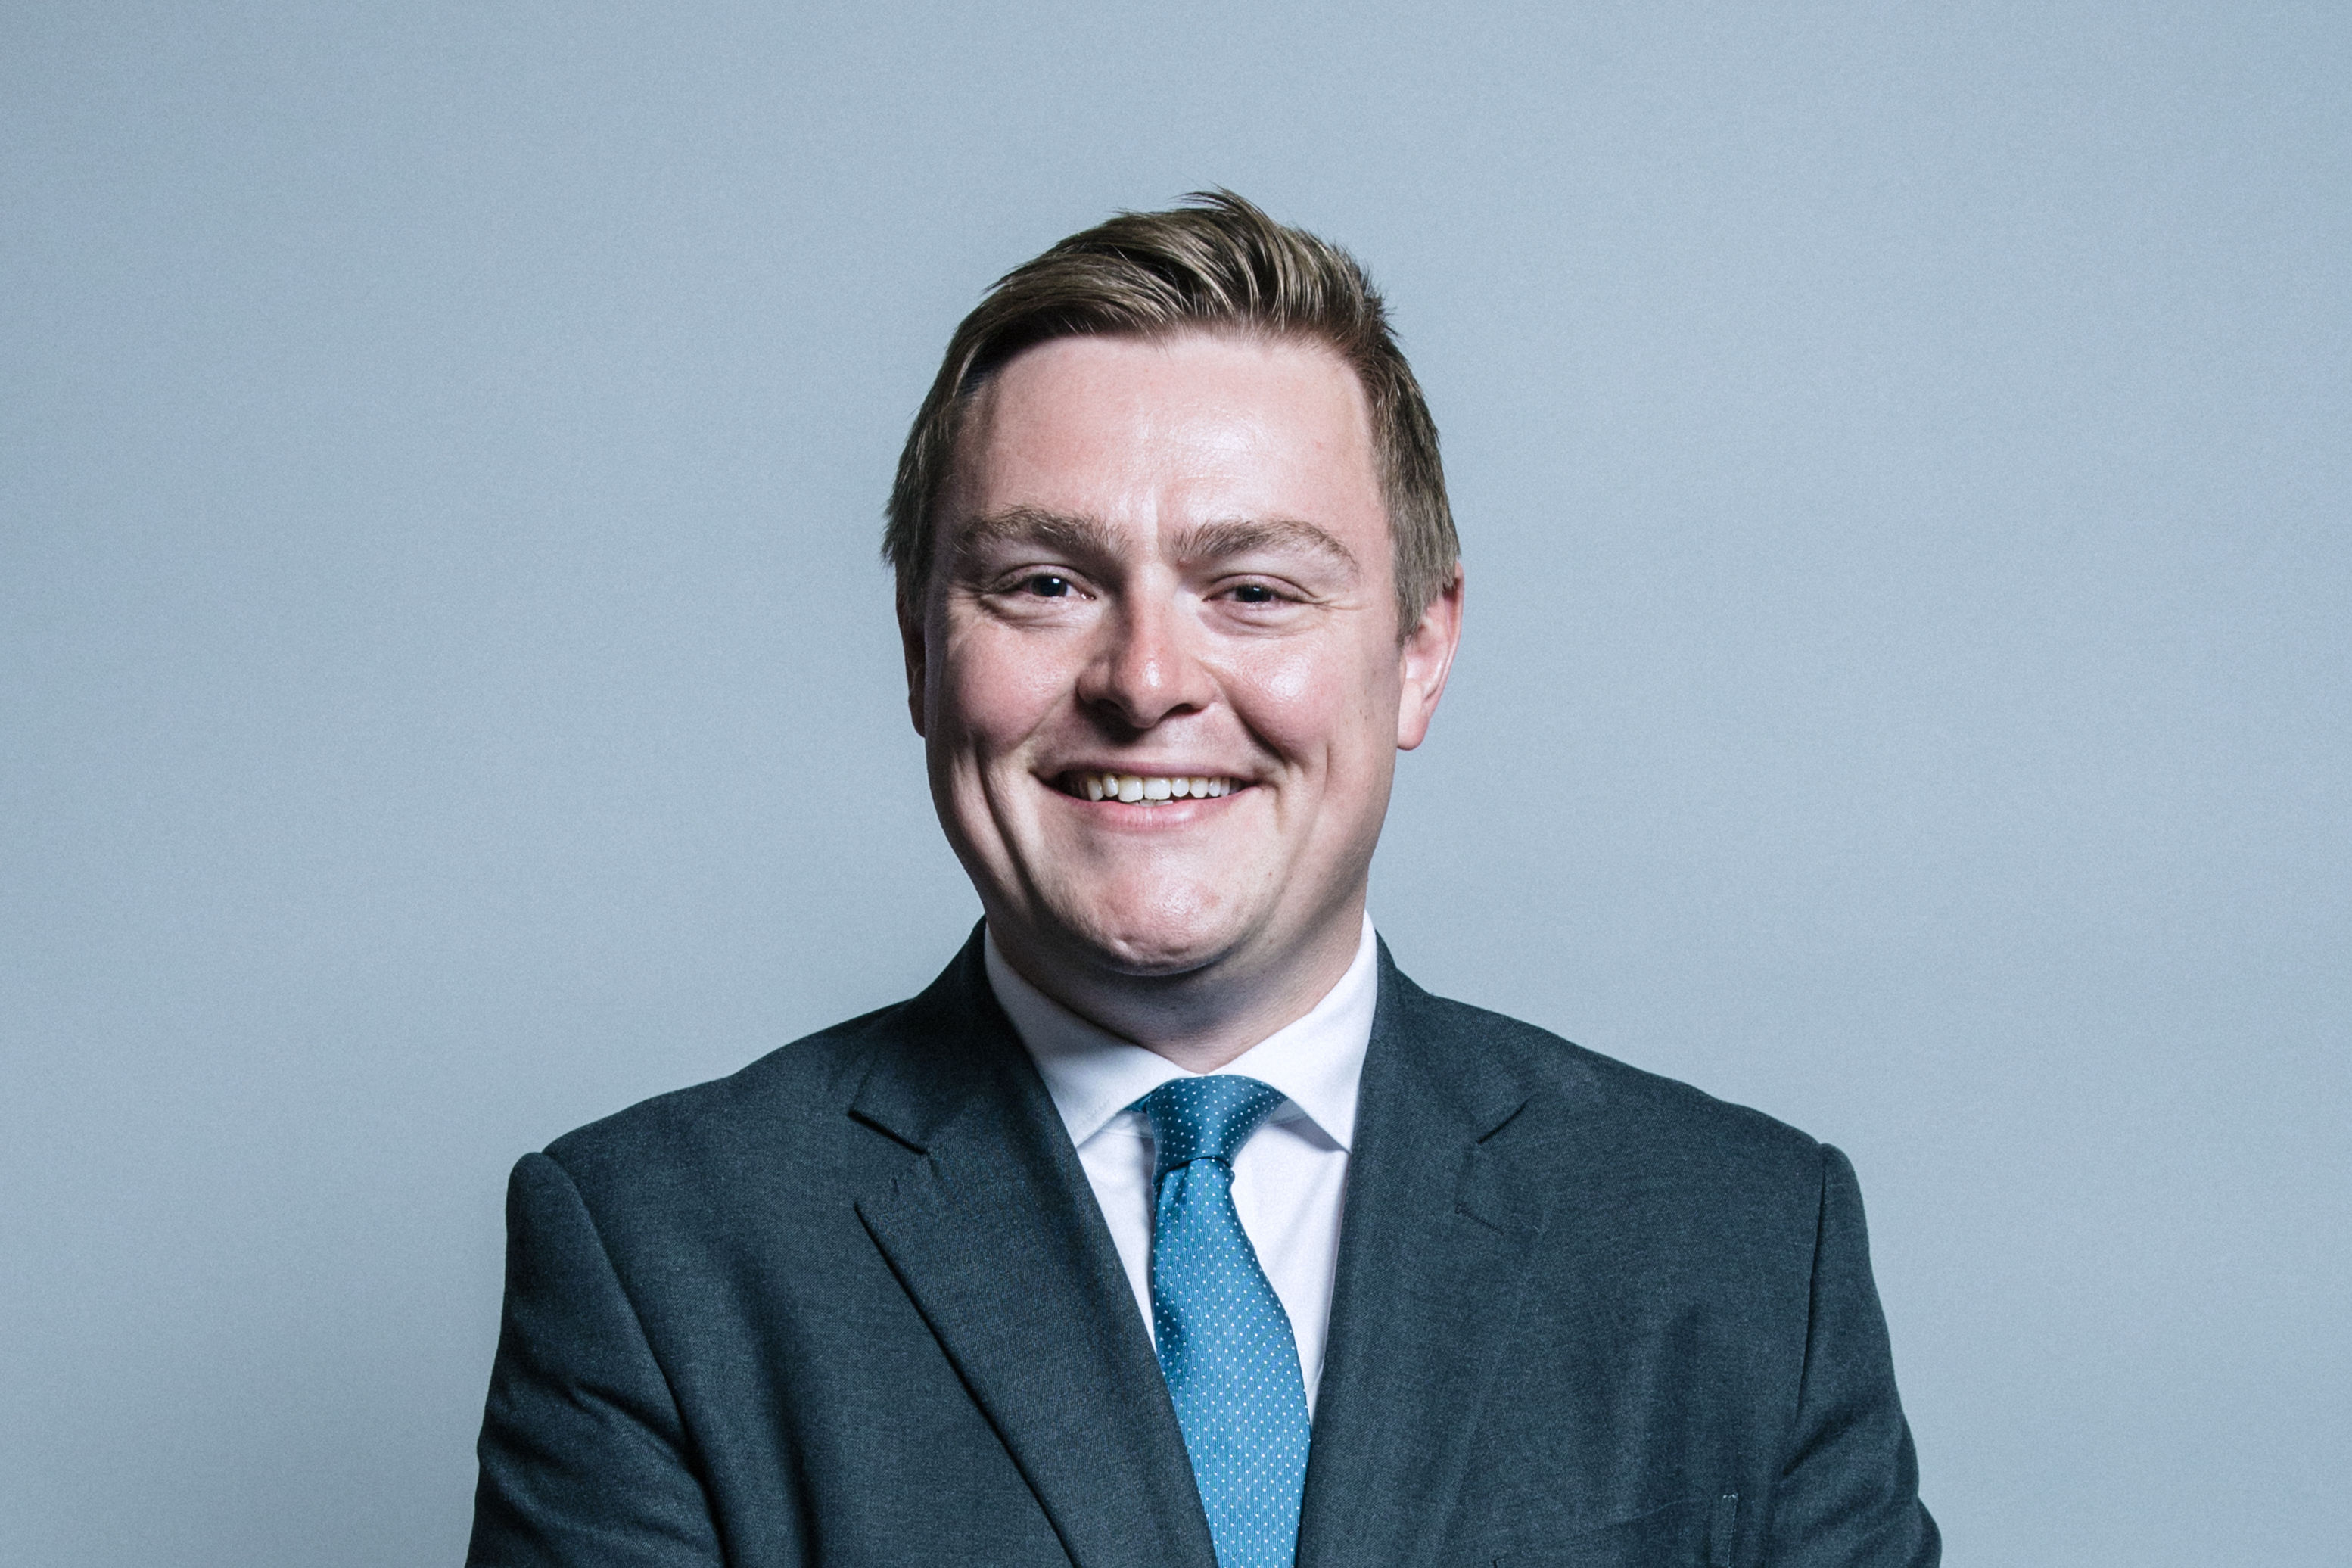 Tory MP Will Quince has quit as a ministerial aide over Theresa May's Brexit plan (Chris McAndrew/UK Parliament/(Attribution 3.0 Unported (CC BY 3.0)/PA)